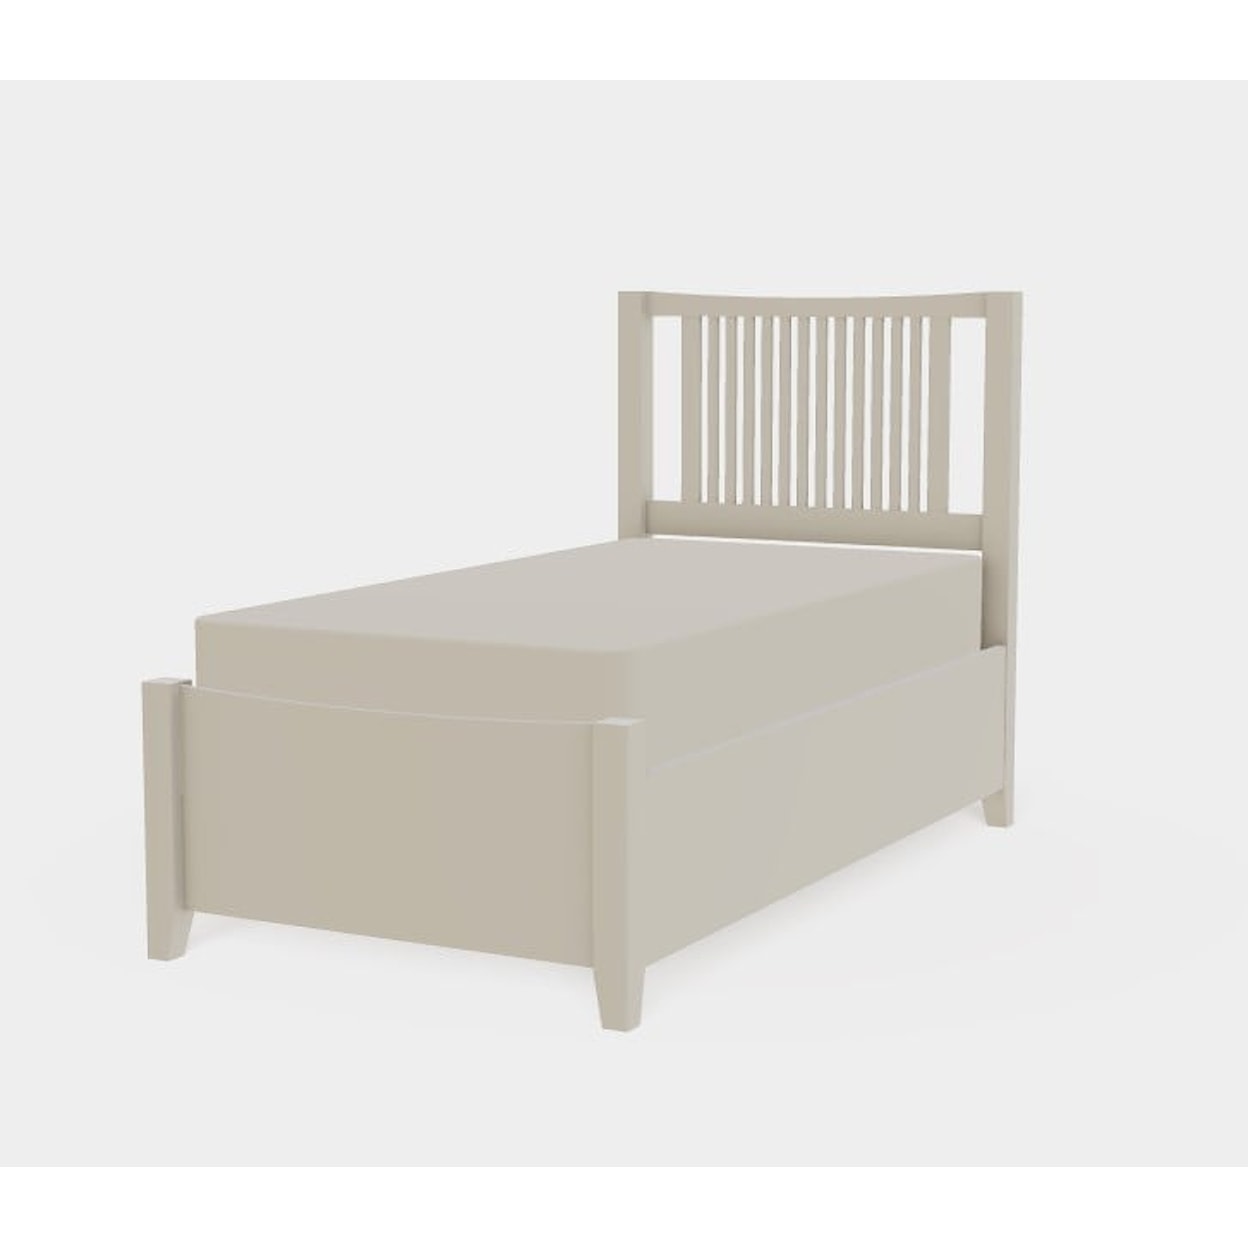 Mavin Atwood Group Atwood Twin XL Left Drawerside Spindle Bed